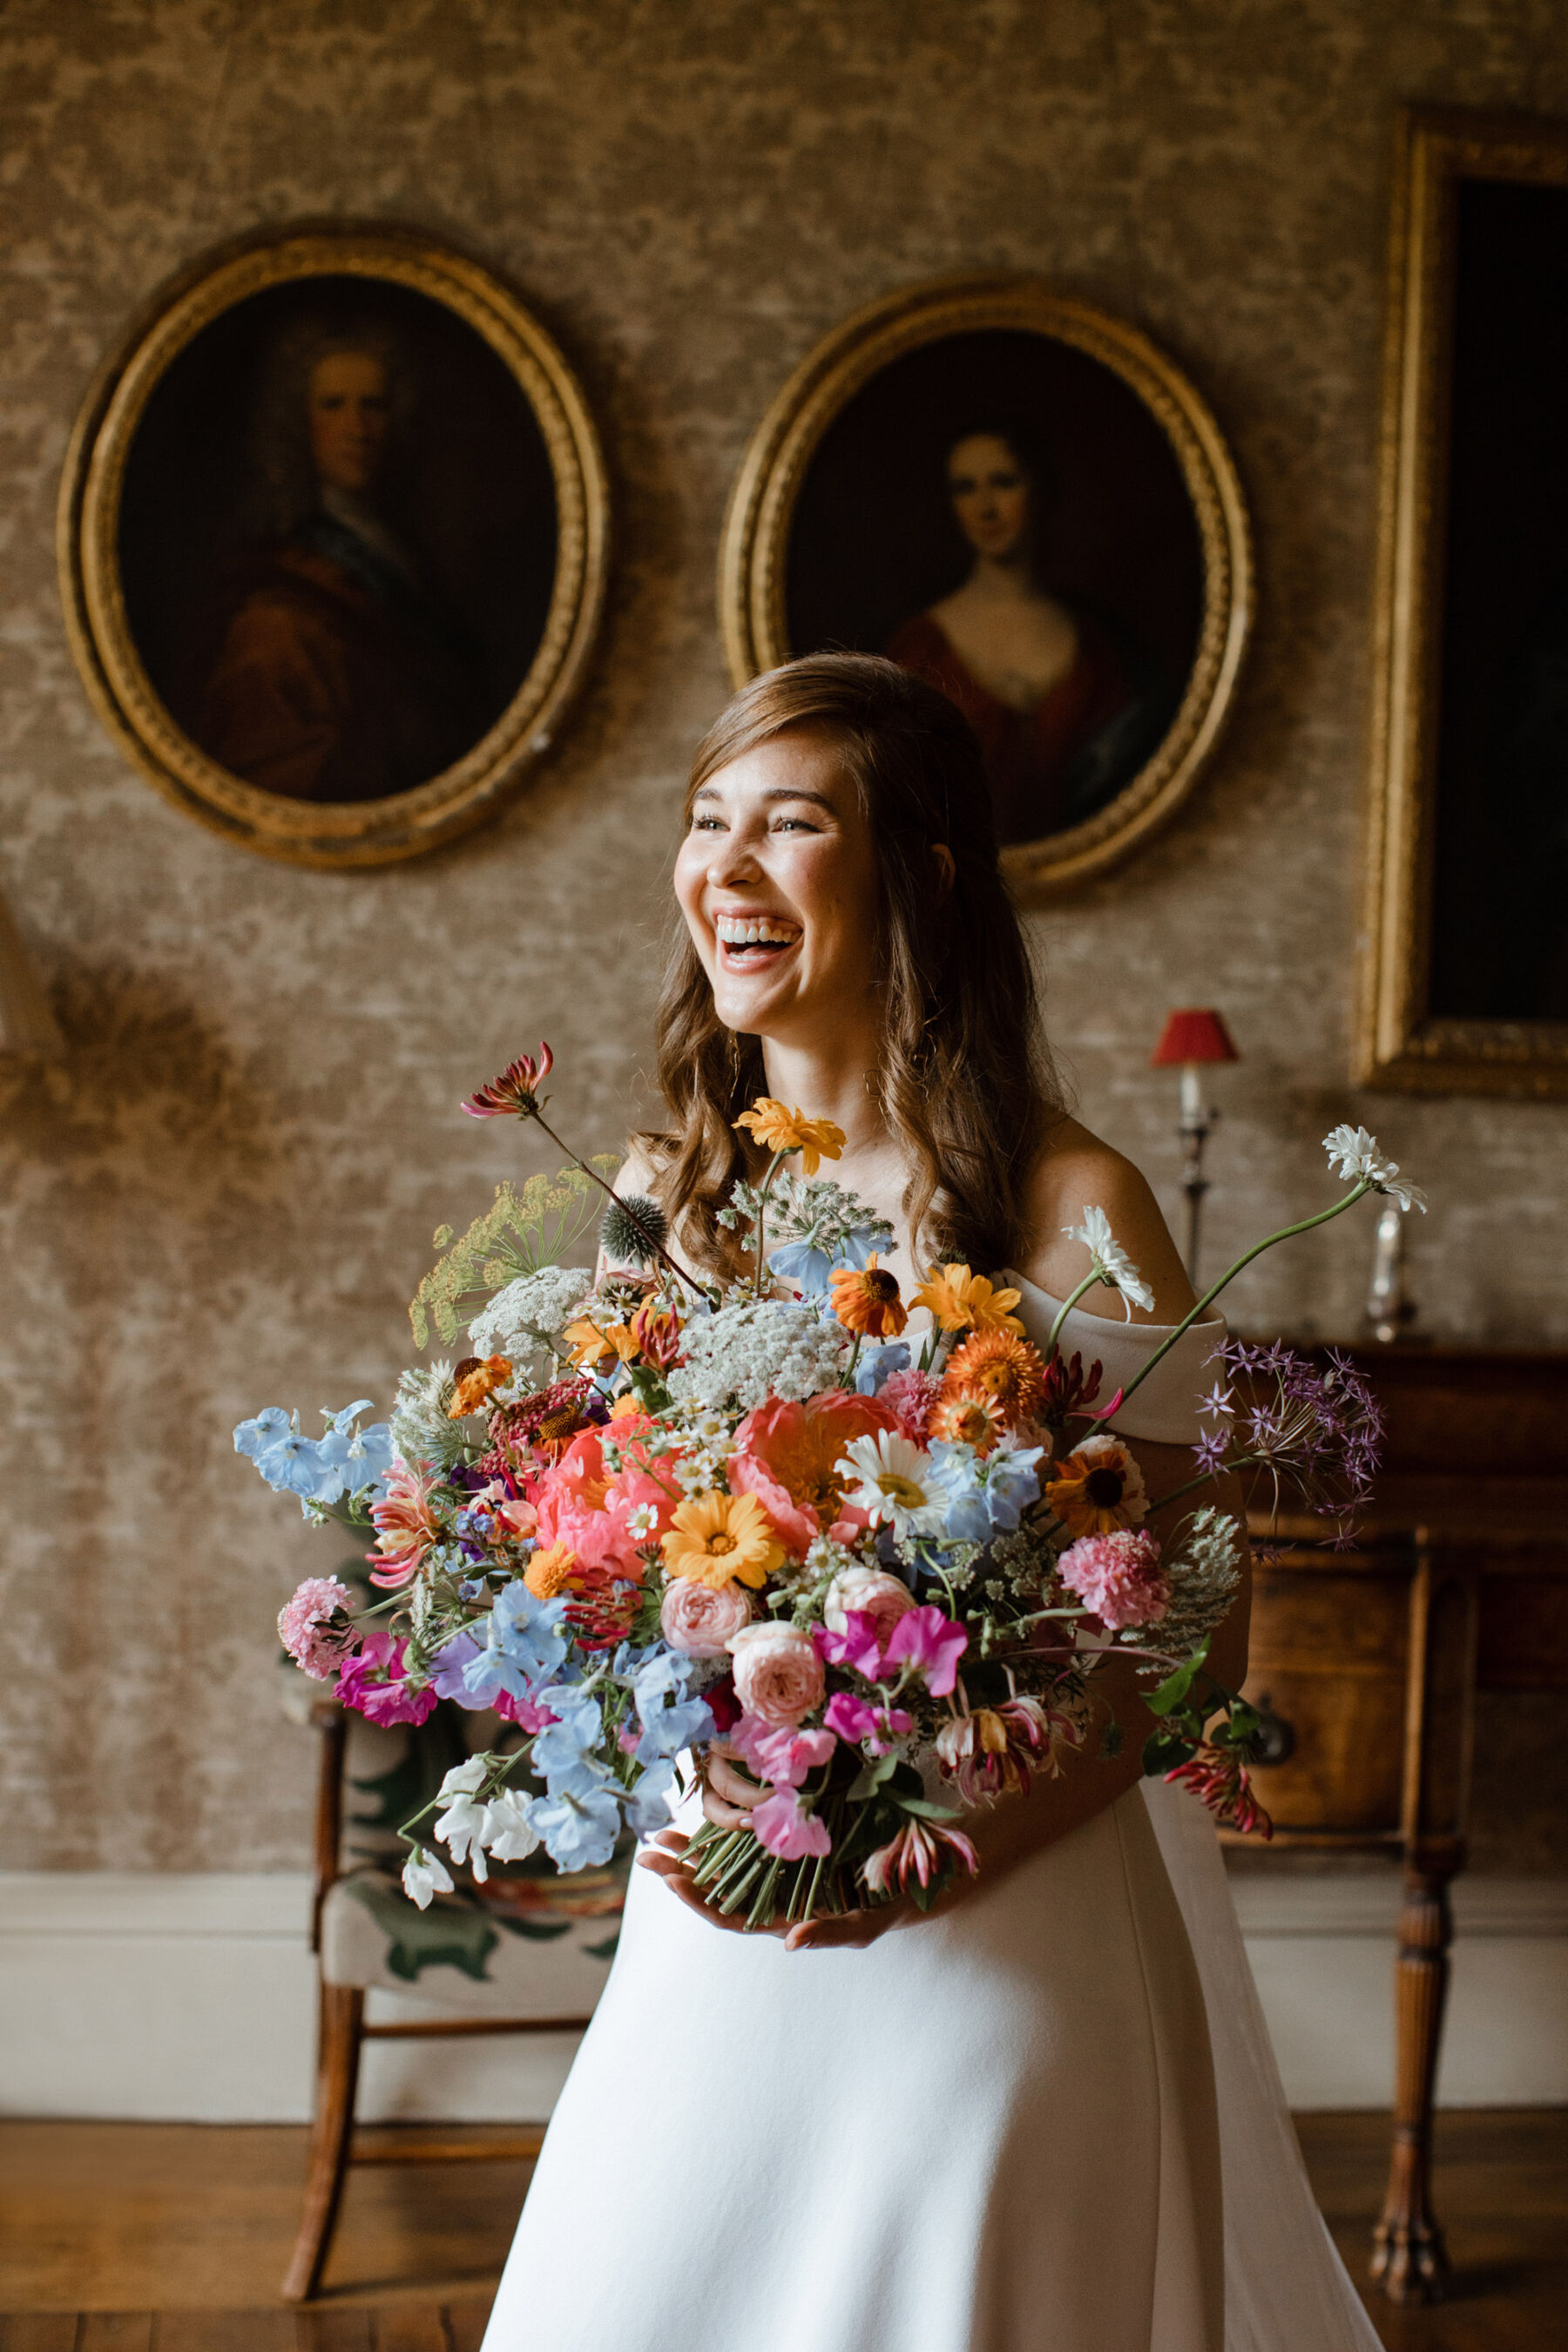 Bright, bold and colourful wedding flowers